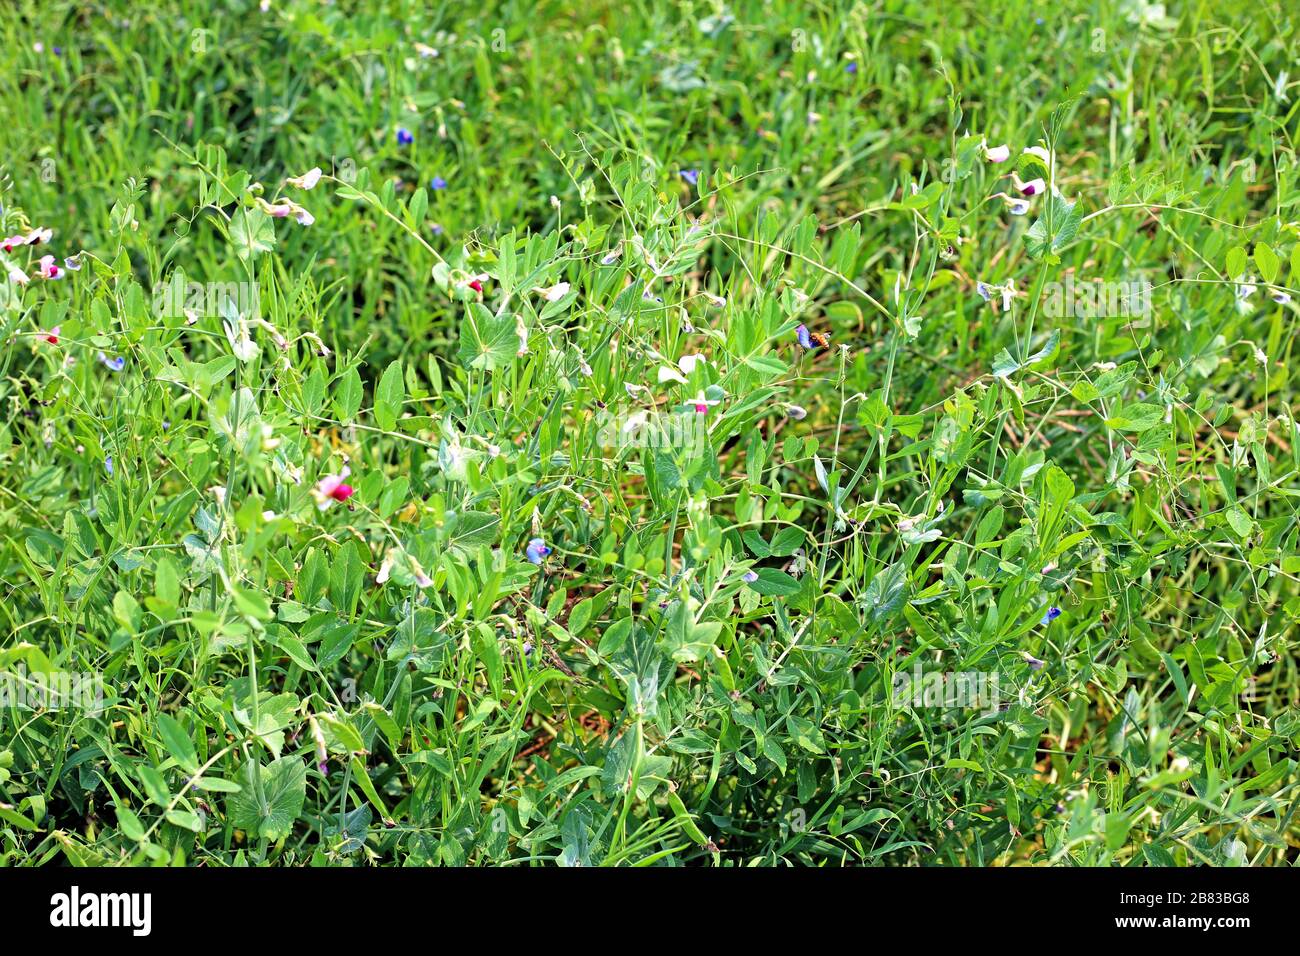 Pea field and flower growing Stock Photo